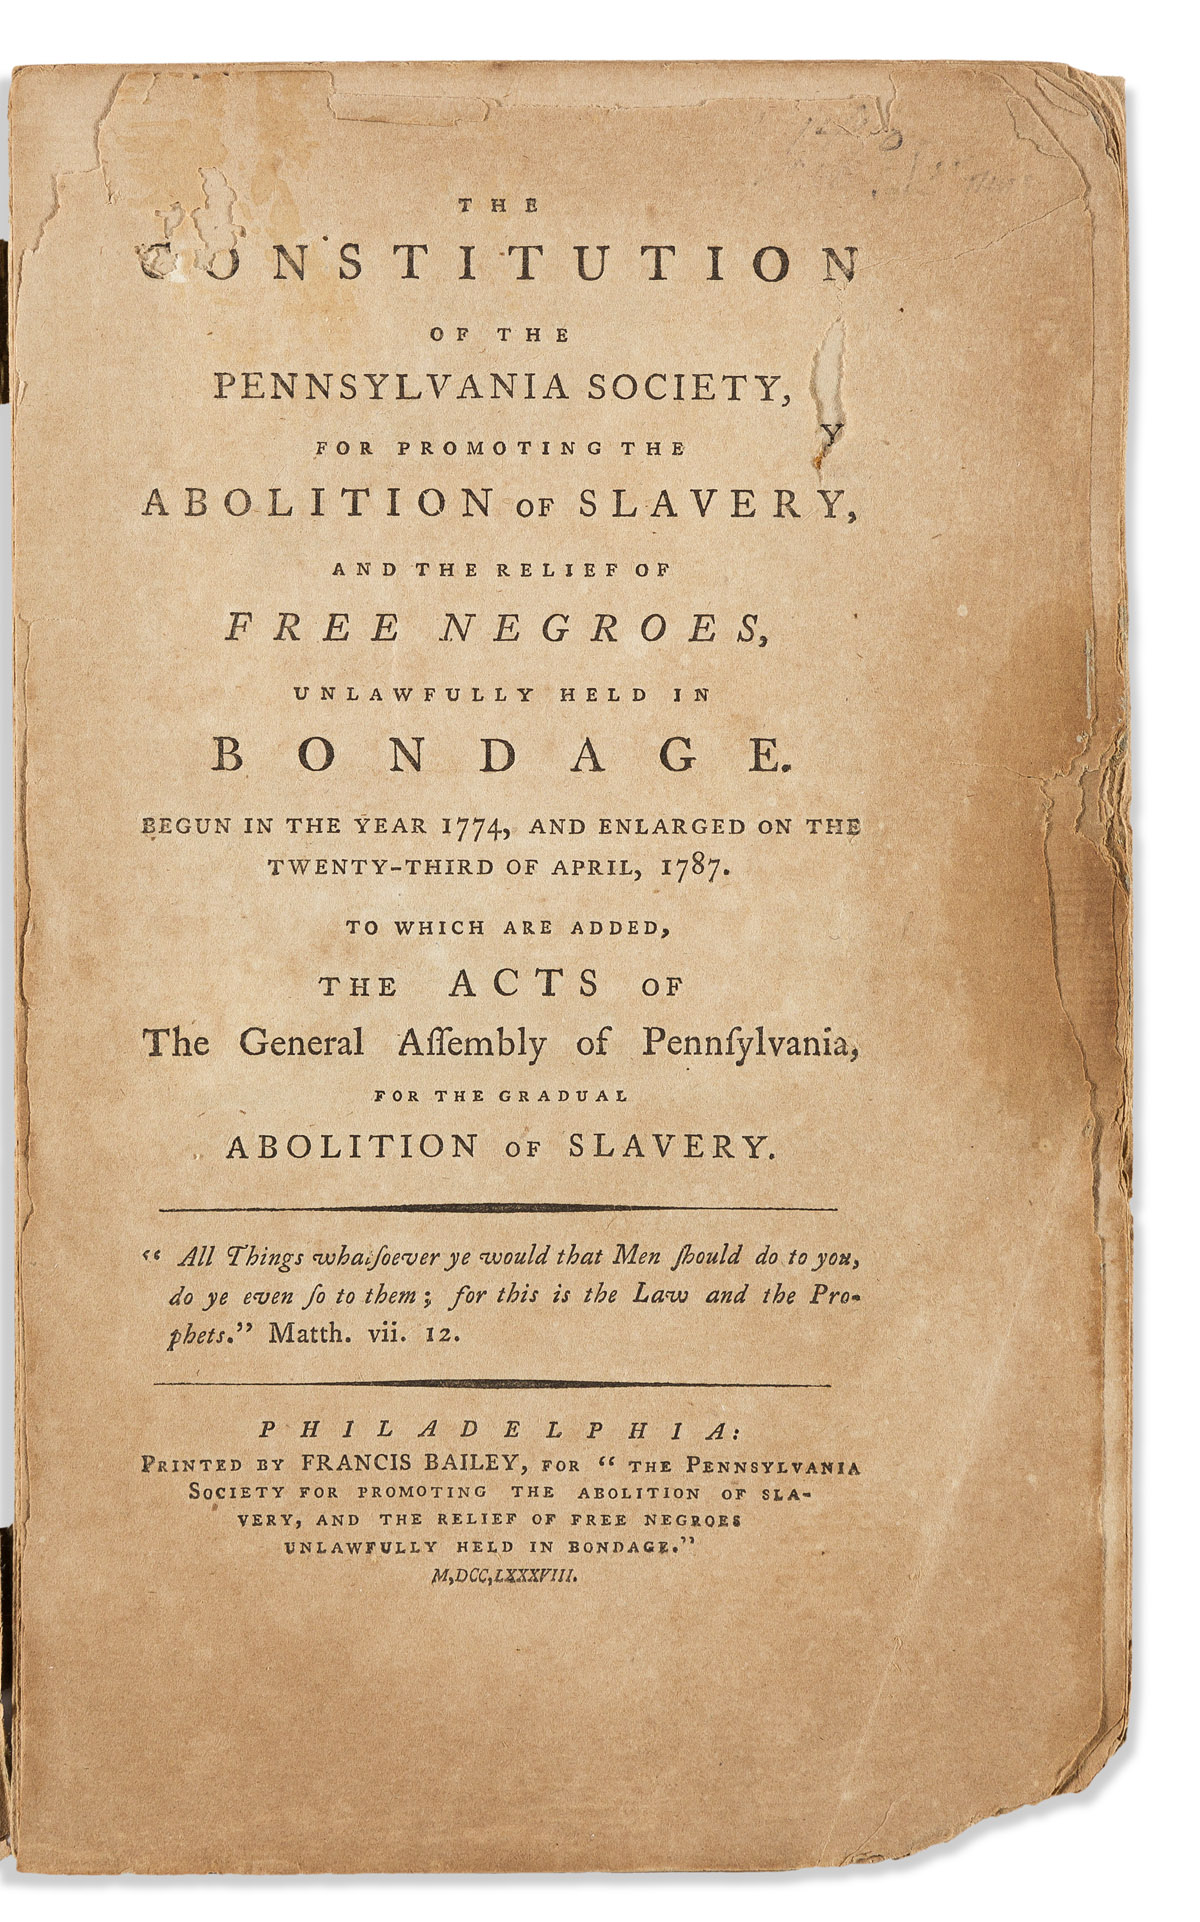 (SLAVERY & ABOLITION.) The Constitution of the Pennsylvania Society for Promoting the Abolition of Slavery.